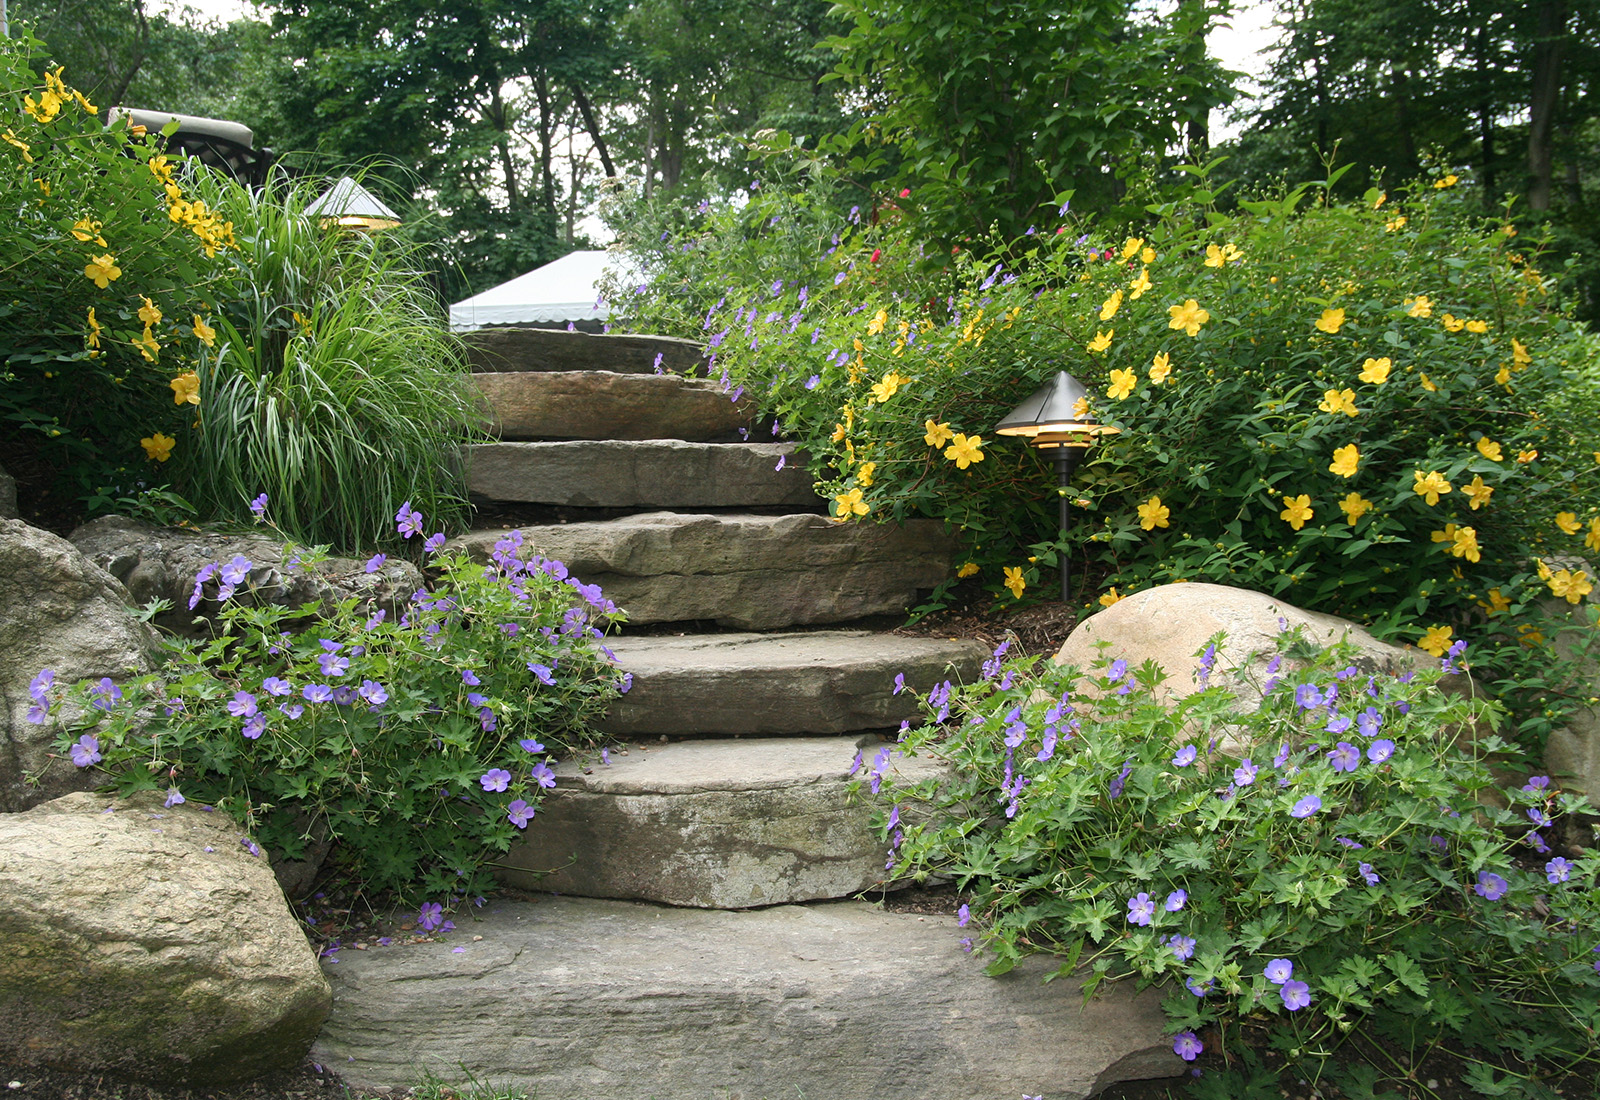 Stone garden steps and boulder retaining wall planted with flowering perennials.